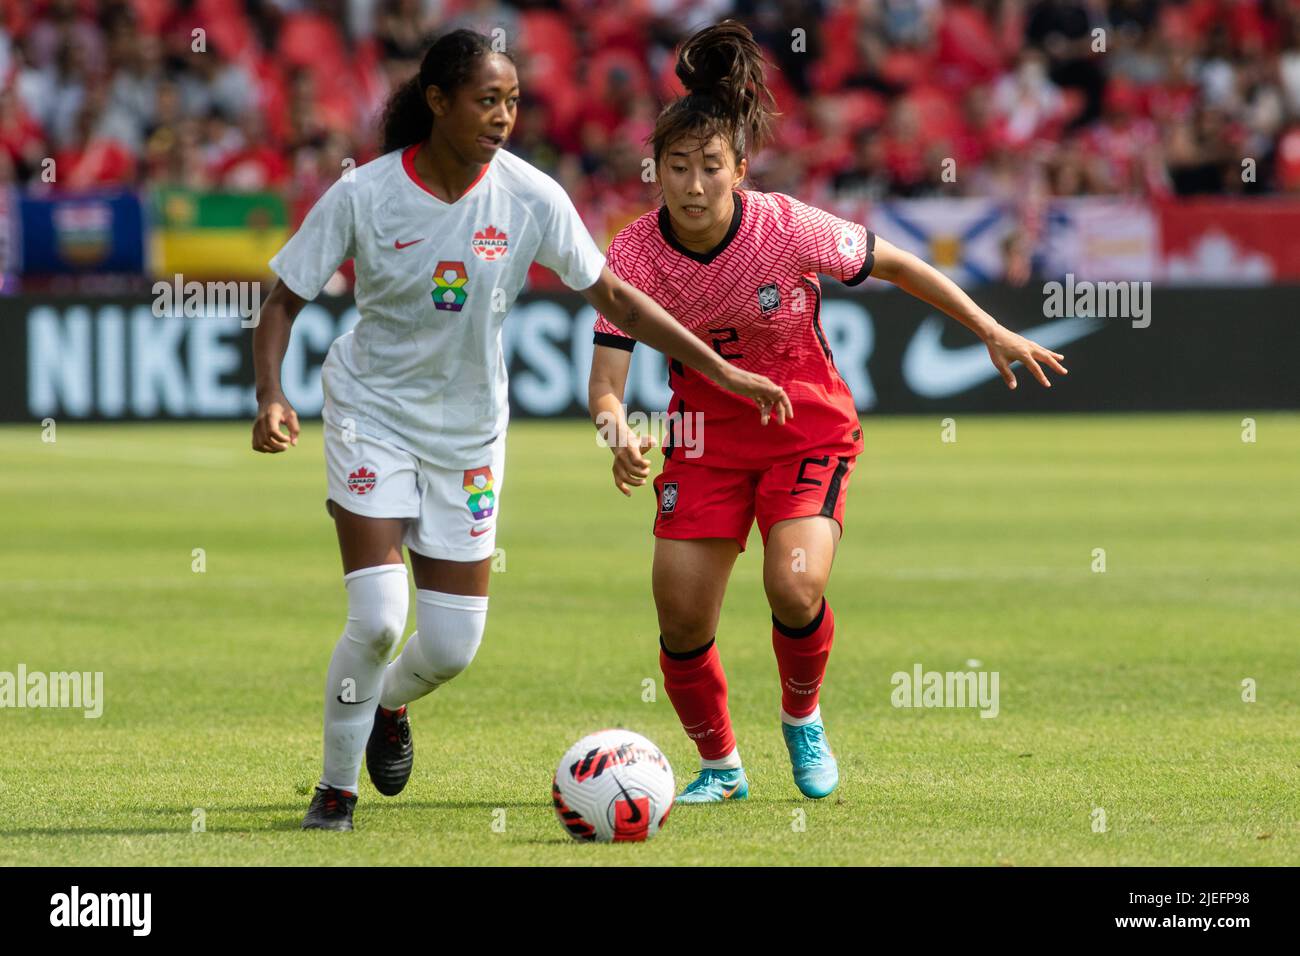 Toronto, Canada, June 26, 2022: Jayde Riviere (left) of Team Canada and Hyo-Joo Choo (right) of Team Korea Republic compete for the ball during the International Friendly Match at BMO Field in Toronto, Canada. Canada and Korea draw 0-0.Credit: Phamai Techaphan/Alamy Live News Stock Photo